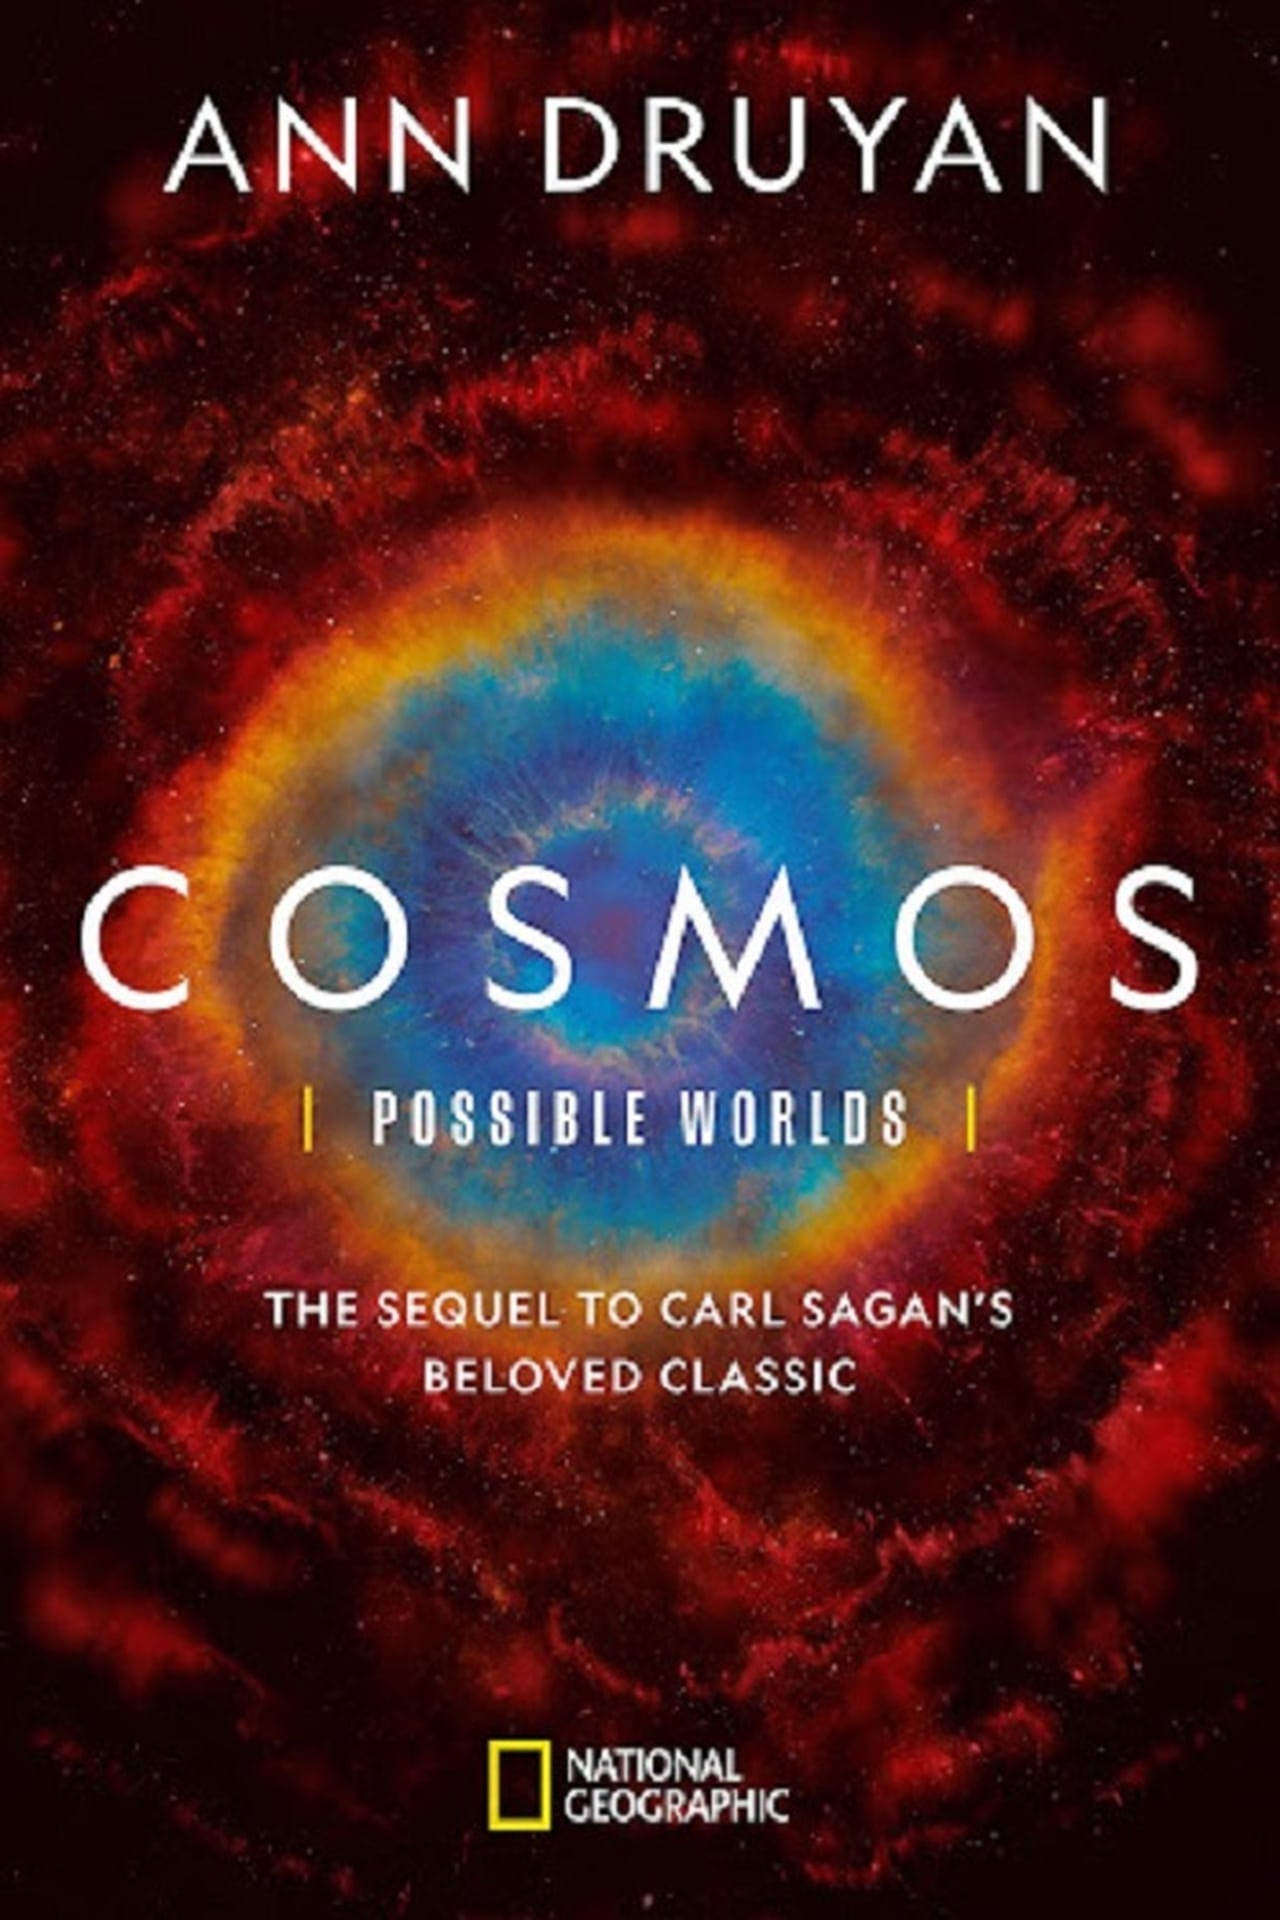 cosmos a spacetime odyssey free